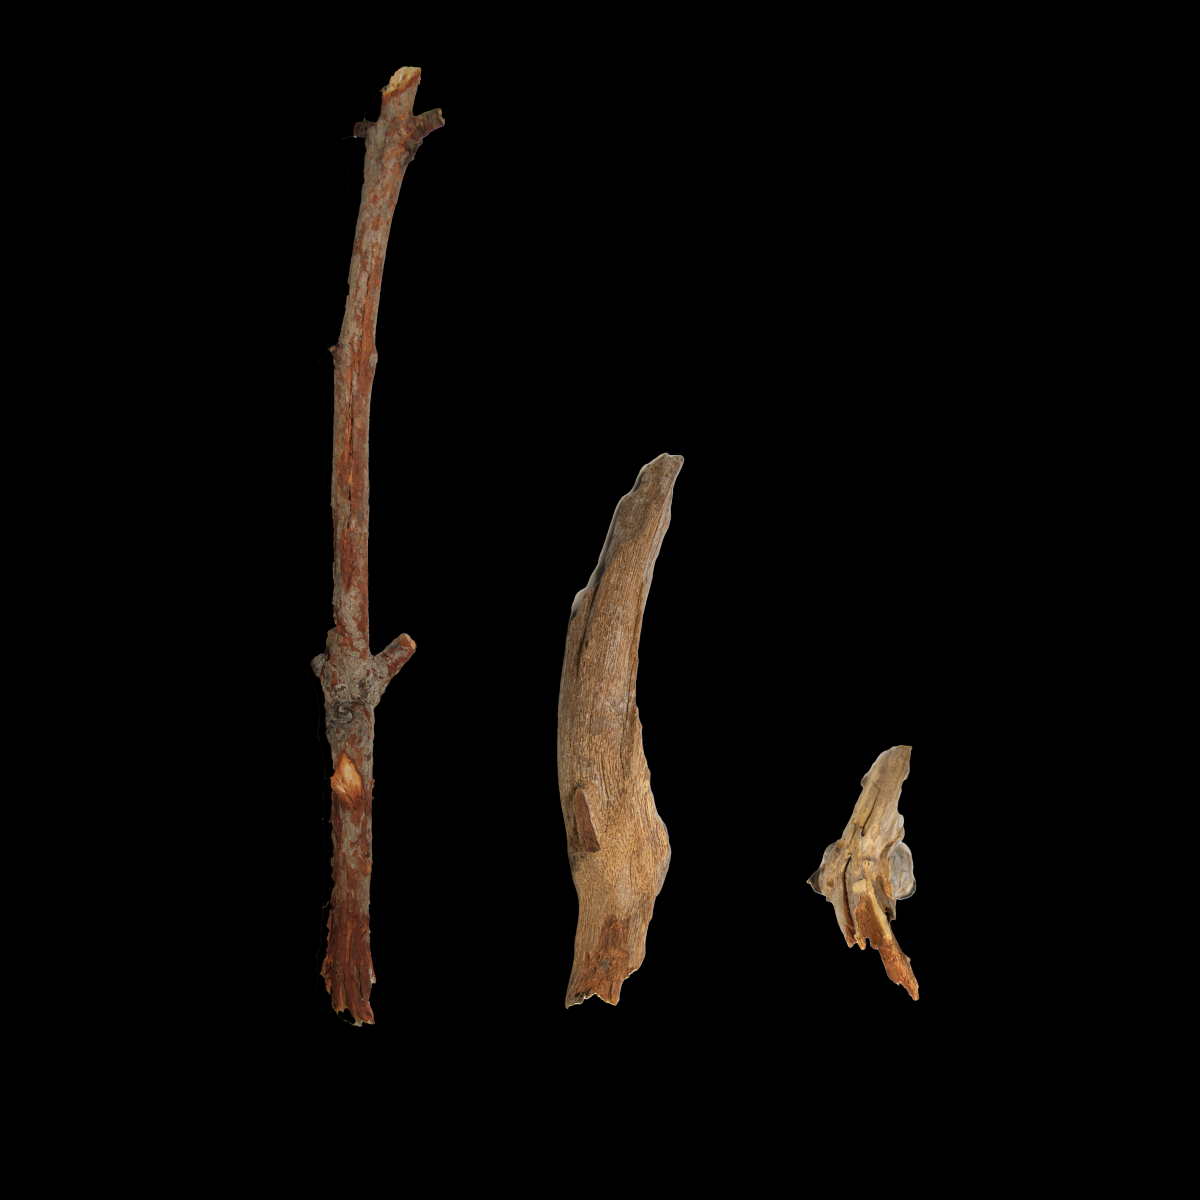 A photograph of 3 different styles of drum sticks that the palm cockatoos craft.On a black background, there is a long and thick stick on the left, a thicker stick around half the length in the middle, and an even shorter one around quarter of the length on the right.